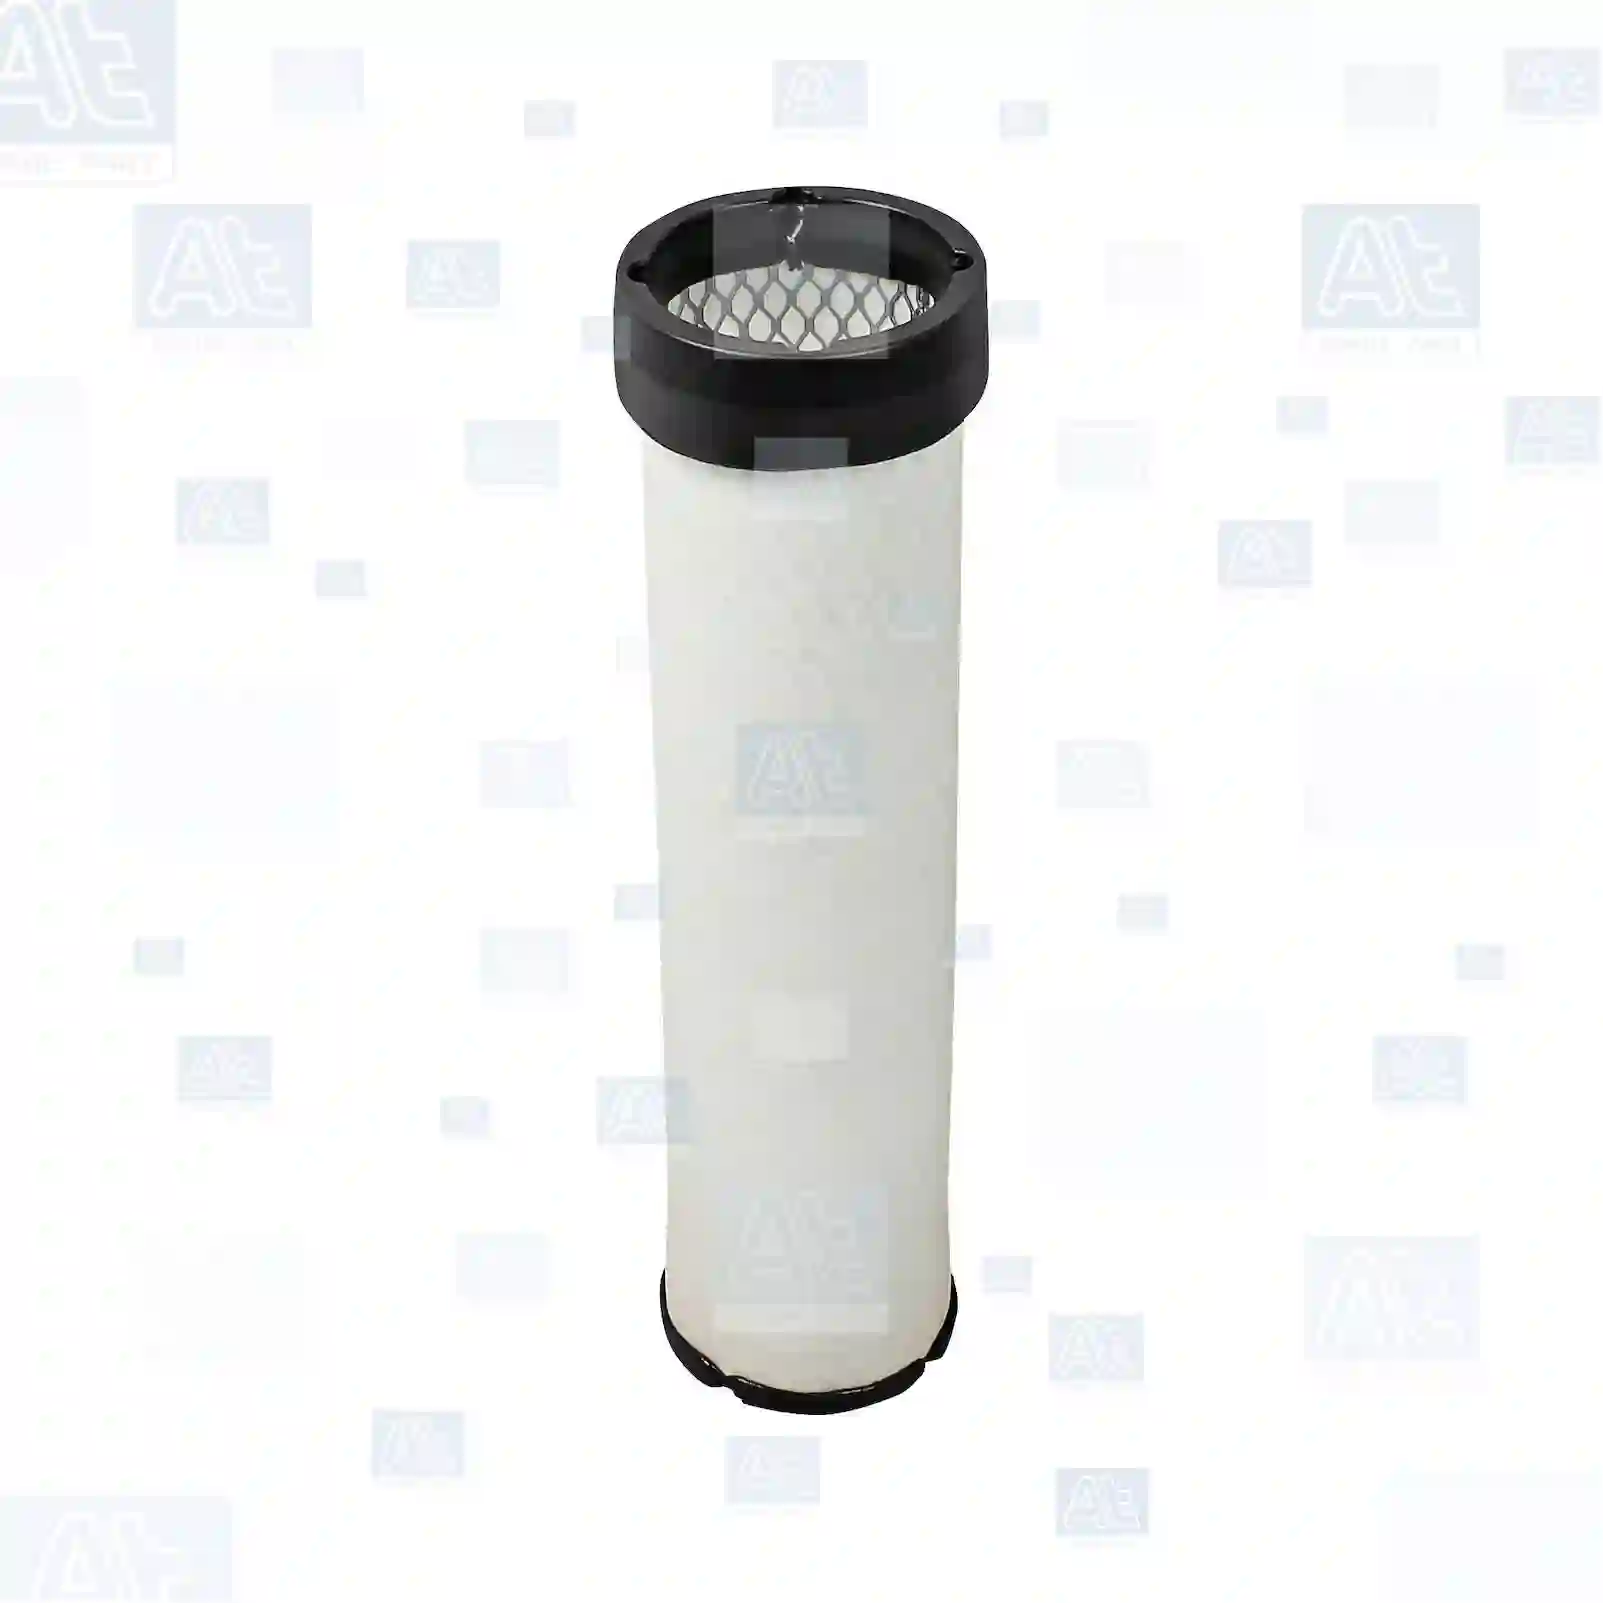 Air filter, inner, at no 77706189, oem no: 1930590, 1931167, 222422A1, 47128203, 47132347, 76094057, 87418365, 87438245, 87682999, 87718006, Z2950577, 110-6331, 126-5210, 131-8903, 212-4478, 0003188270, 6000105758, 01022520, 90003011, 90013817, 86562968, 89002287, 9304100167, 4209588, 4247974, 4486014, 5640058011, AT199501, L4247974, L4486014, U2428, 090003011, 090013817, 01903669S, 02992677S, 02997050S, 02997094S, 08032064S, 08041642S, 1903669S, 2992677S, 2997050S, 2997094S, 500038750S, 504064501S, 504336841S, 8032064S, 8041642S, 99478393S, 32/915702, AT171854, AT199501, ER263096, RT6005011112, RT600501112, 1000113384, 55231-2615-0, 3540052M1, 7619405, 113851M1, 3540052M1, 4270034M1, 6190628M1, VA263059, 222422A1, 3540052M1, 01930590, 05080445, 47128156, 47132346, 72957460, 81930590, 82981153, 86555827, 87418365, 87438245, 87569533, 87631625, 87682999, 26510325, 26510343, 090003011, 132000190707, 6190628M1, 11883619, 43904218, 43921493, 43931955, 70918479, ZG00905-0008 At Spare Part | Engine, Accelerator Pedal, Camshaft, Connecting Rod, Crankcase, Crankshaft, Cylinder Head, Engine Suspension Mountings, Exhaust Manifold, Exhaust Gas Recirculation, Filter Kits, Flywheel Housing, General Overhaul Kits, Engine, Intake Manifold, Oil Cleaner, Oil Cooler, Oil Filter, Oil Pump, Oil Sump, Piston & Liner, Sensor & Switch, Timing Case, Turbocharger, Cooling System, Belt Tensioner, Coolant Filter, Coolant Pipe, Corrosion Prevention Agent, Drive, Expansion Tank, Fan, Intercooler, Monitors & Gauges, Radiator, Thermostat, V-Belt / Timing belt, Water Pump, Fuel System, Electronical Injector Unit, Feed Pump, Fuel Filter, cpl., Fuel Gauge Sender,  Fuel Line, Fuel Pump, Fuel Tank, Injection Line Kit, Injection Pump, Exhaust System, Clutch & Pedal, Gearbox, Propeller Shaft, Axles, Brake System, Hubs & Wheels, Suspension, Leaf Spring, Universal Parts / Accessories, Steering, Electrical System, Cabin Air filter, inner, at no 77706189, oem no: 1930590, 1931167, 222422A1, 47128203, 47132347, 76094057, 87418365, 87438245, 87682999, 87718006, Z2950577, 110-6331, 126-5210, 131-8903, 212-4478, 0003188270, 6000105758, 01022520, 90003011, 90013817, 86562968, 89002287, 9304100167, 4209588, 4247974, 4486014, 5640058011, AT199501, L4247974, L4486014, U2428, 090003011, 090013817, 01903669S, 02992677S, 02997050S, 02997094S, 08032064S, 08041642S, 1903669S, 2992677S, 2997050S, 2997094S, 500038750S, 504064501S, 504336841S, 8032064S, 8041642S, 99478393S, 32/915702, AT171854, AT199501, ER263096, RT6005011112, RT600501112, 1000113384, 55231-2615-0, 3540052M1, 7619405, 113851M1, 3540052M1, 4270034M1, 6190628M1, VA263059, 222422A1, 3540052M1, 01930590, 05080445, 47128156, 47132346, 72957460, 81930590, 82981153, 86555827, 87418365, 87438245, 87569533, 87631625, 87682999, 26510325, 26510343, 090003011, 132000190707, 6190628M1, 11883619, 43904218, 43921493, 43931955, 70918479, ZG00905-0008 At Spare Part | Engine, Accelerator Pedal, Camshaft, Connecting Rod, Crankcase, Crankshaft, Cylinder Head, Engine Suspension Mountings, Exhaust Manifold, Exhaust Gas Recirculation, Filter Kits, Flywheel Housing, General Overhaul Kits, Engine, Intake Manifold, Oil Cleaner, Oil Cooler, Oil Filter, Oil Pump, Oil Sump, Piston & Liner, Sensor & Switch, Timing Case, Turbocharger, Cooling System, Belt Tensioner, Coolant Filter, Coolant Pipe, Corrosion Prevention Agent, Drive, Expansion Tank, Fan, Intercooler, Monitors & Gauges, Radiator, Thermostat, V-Belt / Timing belt, Water Pump, Fuel System, Electronical Injector Unit, Feed Pump, Fuel Filter, cpl., Fuel Gauge Sender,  Fuel Line, Fuel Pump, Fuel Tank, Injection Line Kit, Injection Pump, Exhaust System, Clutch & Pedal, Gearbox, Propeller Shaft, Axles, Brake System, Hubs & Wheels, Suspension, Leaf Spring, Universal Parts / Accessories, Steering, Electrical System, Cabin